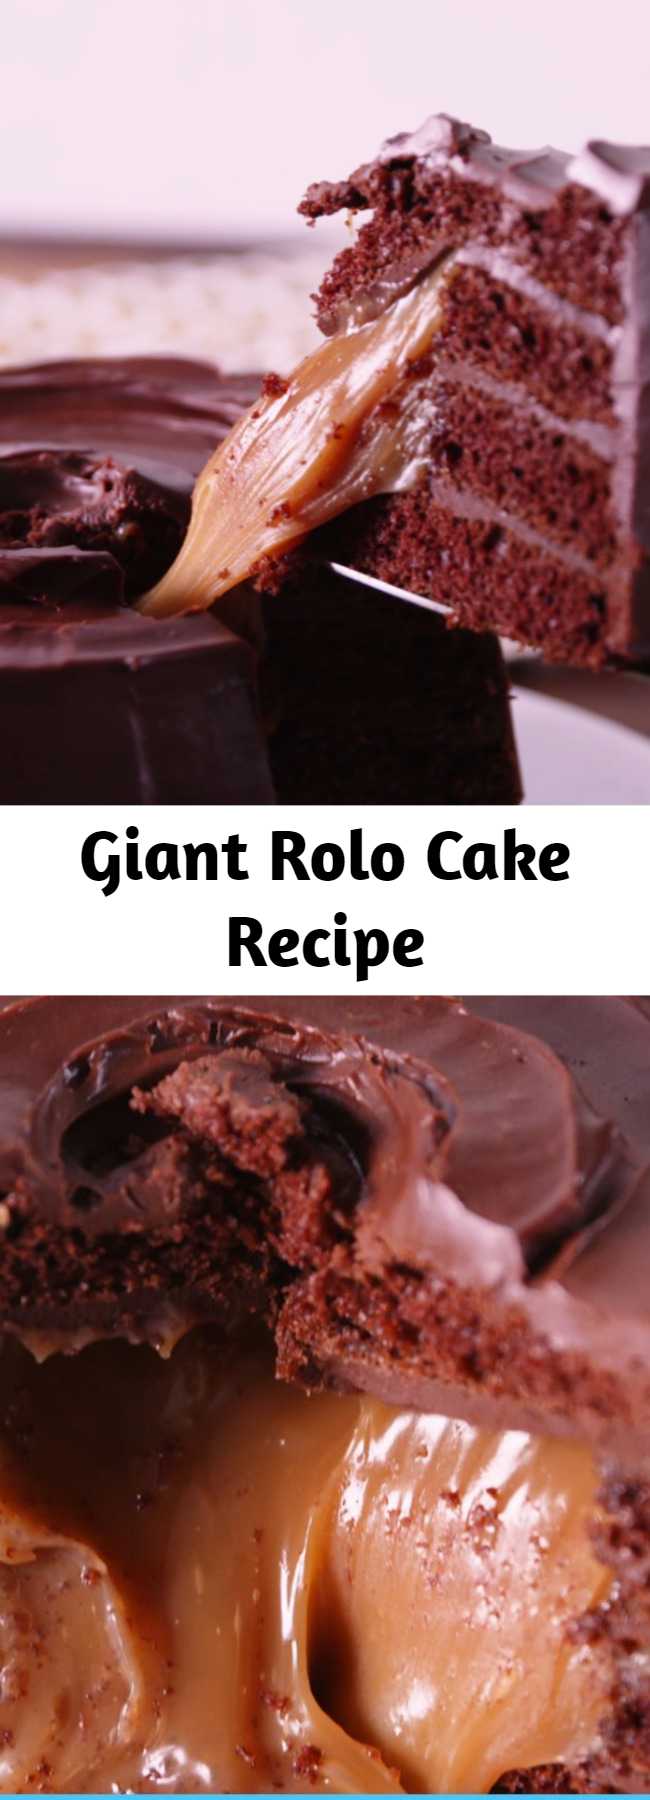 Giant Rolo Cake Recipe - Rolo lovers, try not to freak out when you see this cake.